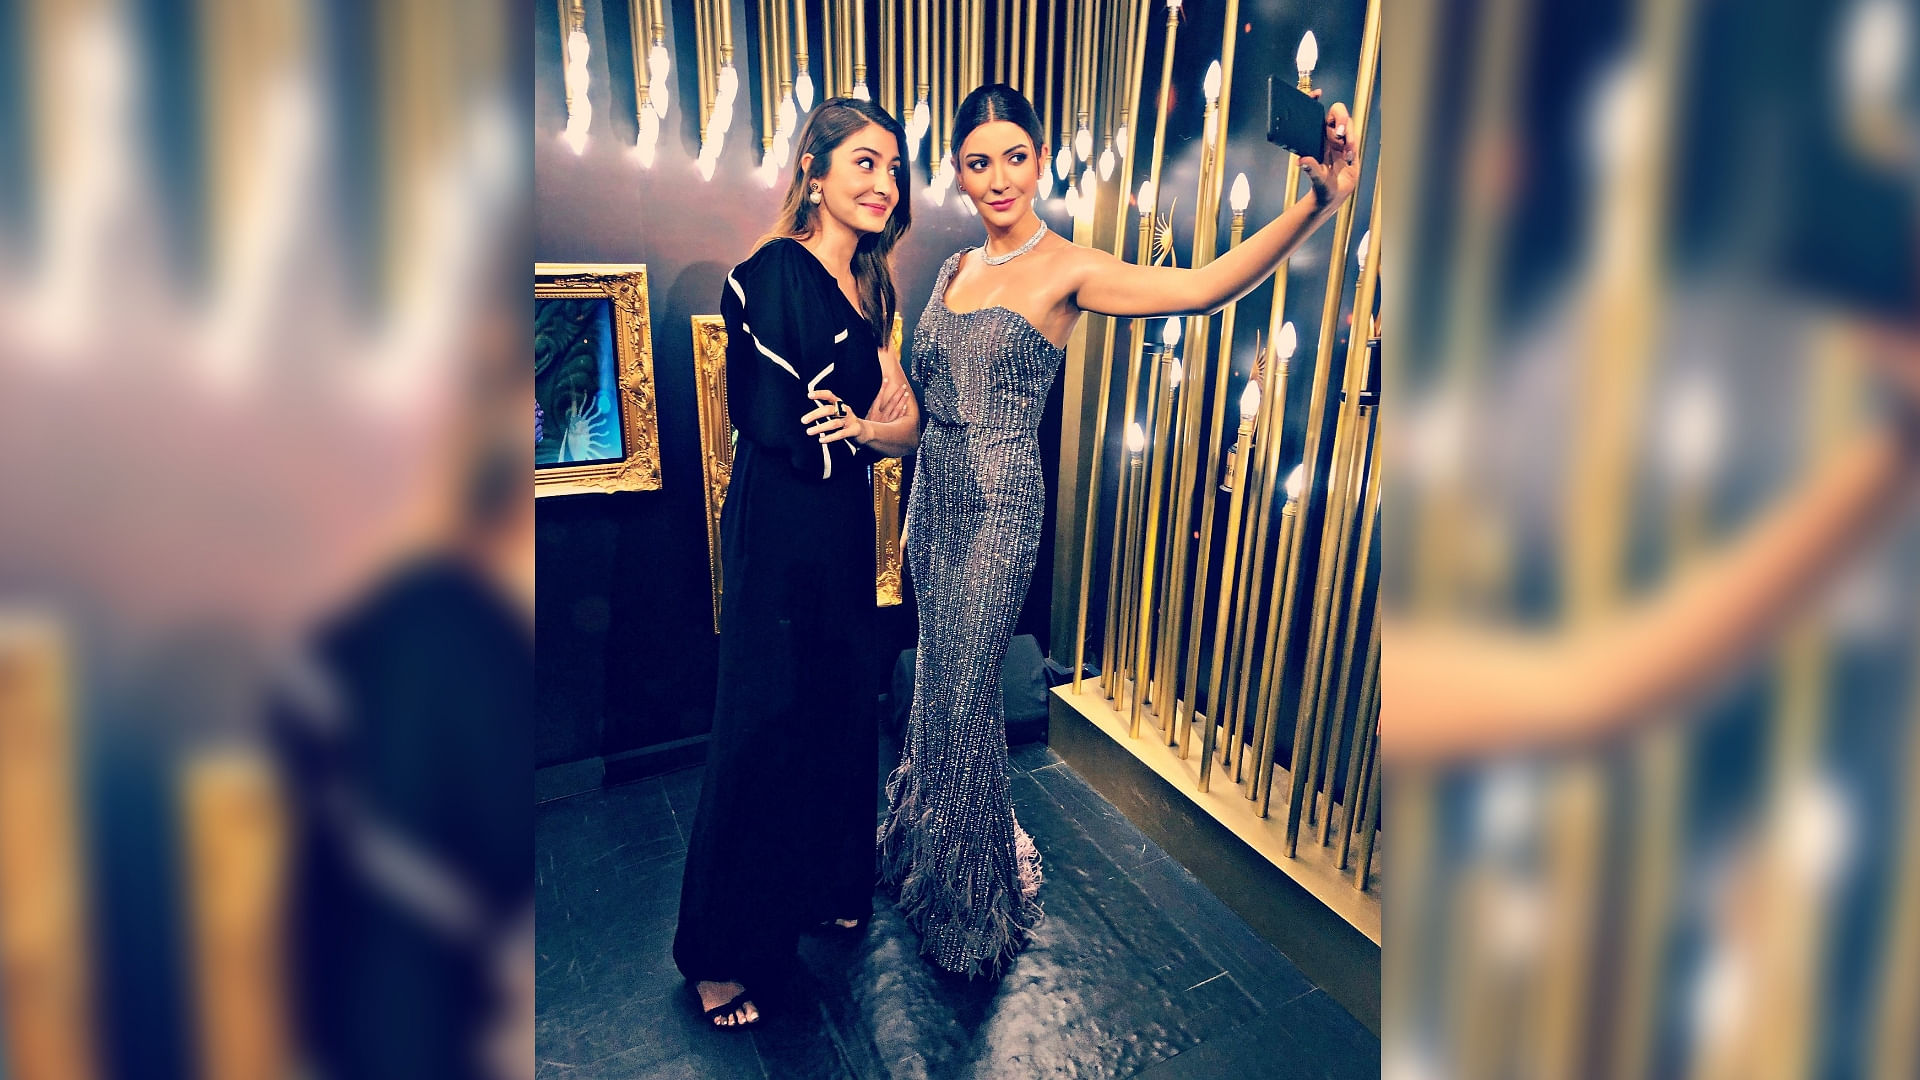 Anushka Sharma poses with her statue at Madame Tussauds in Singapore.